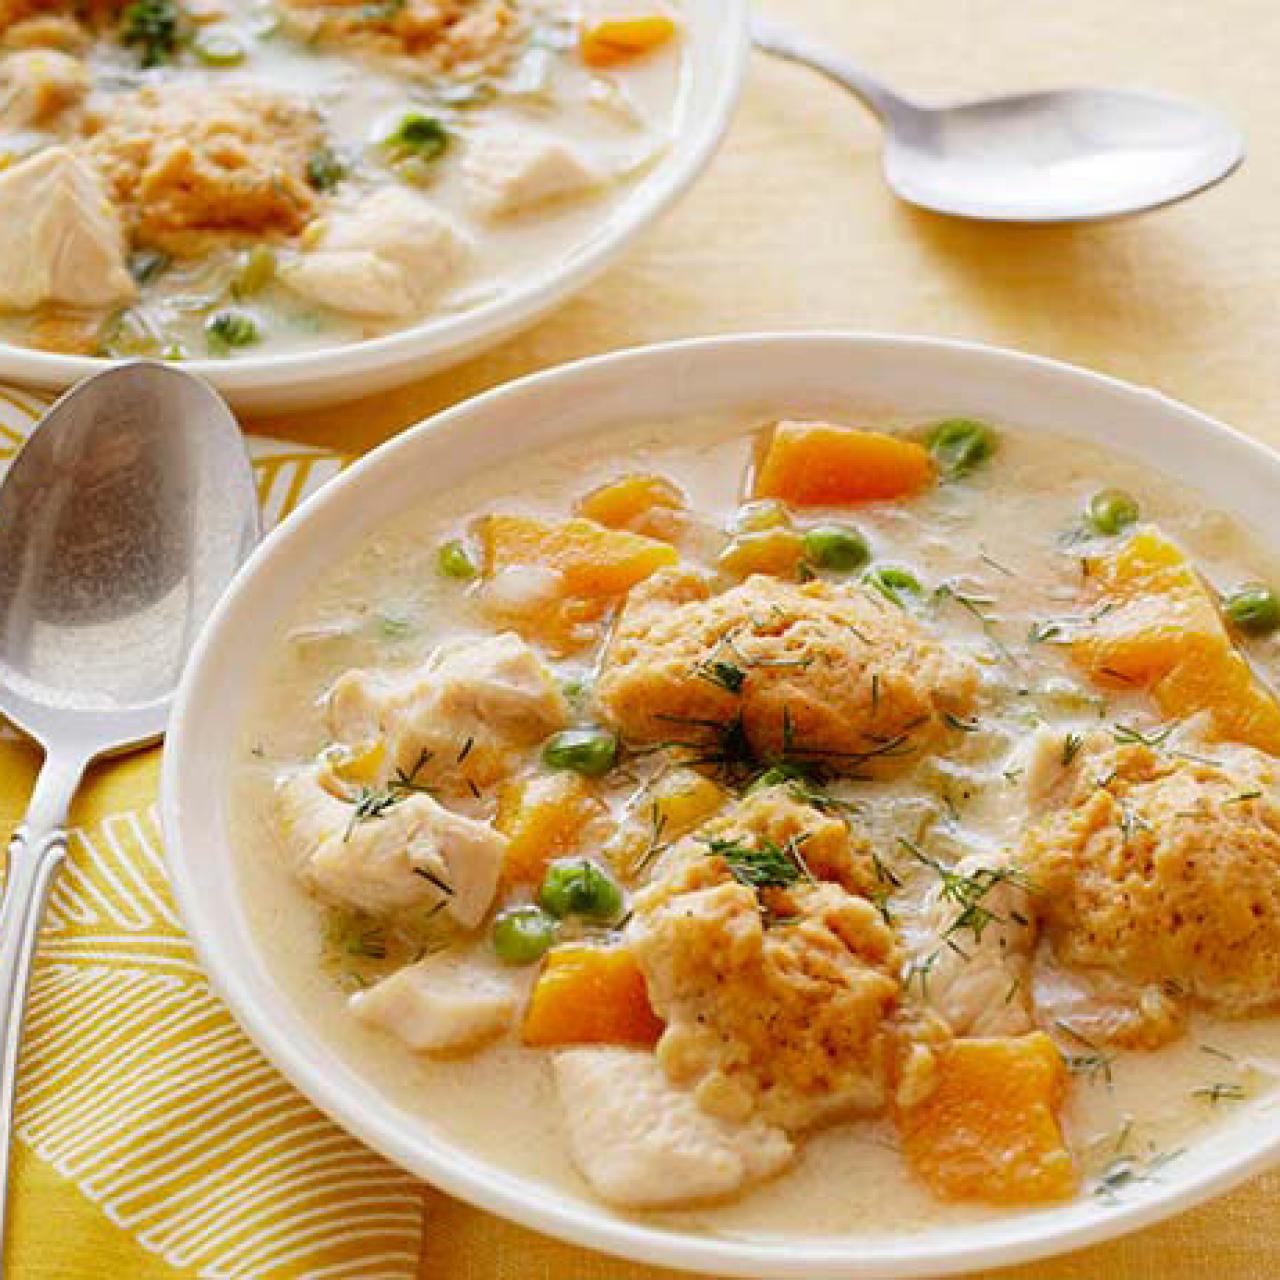 Chicken and Dumplings - Nourish and Fete